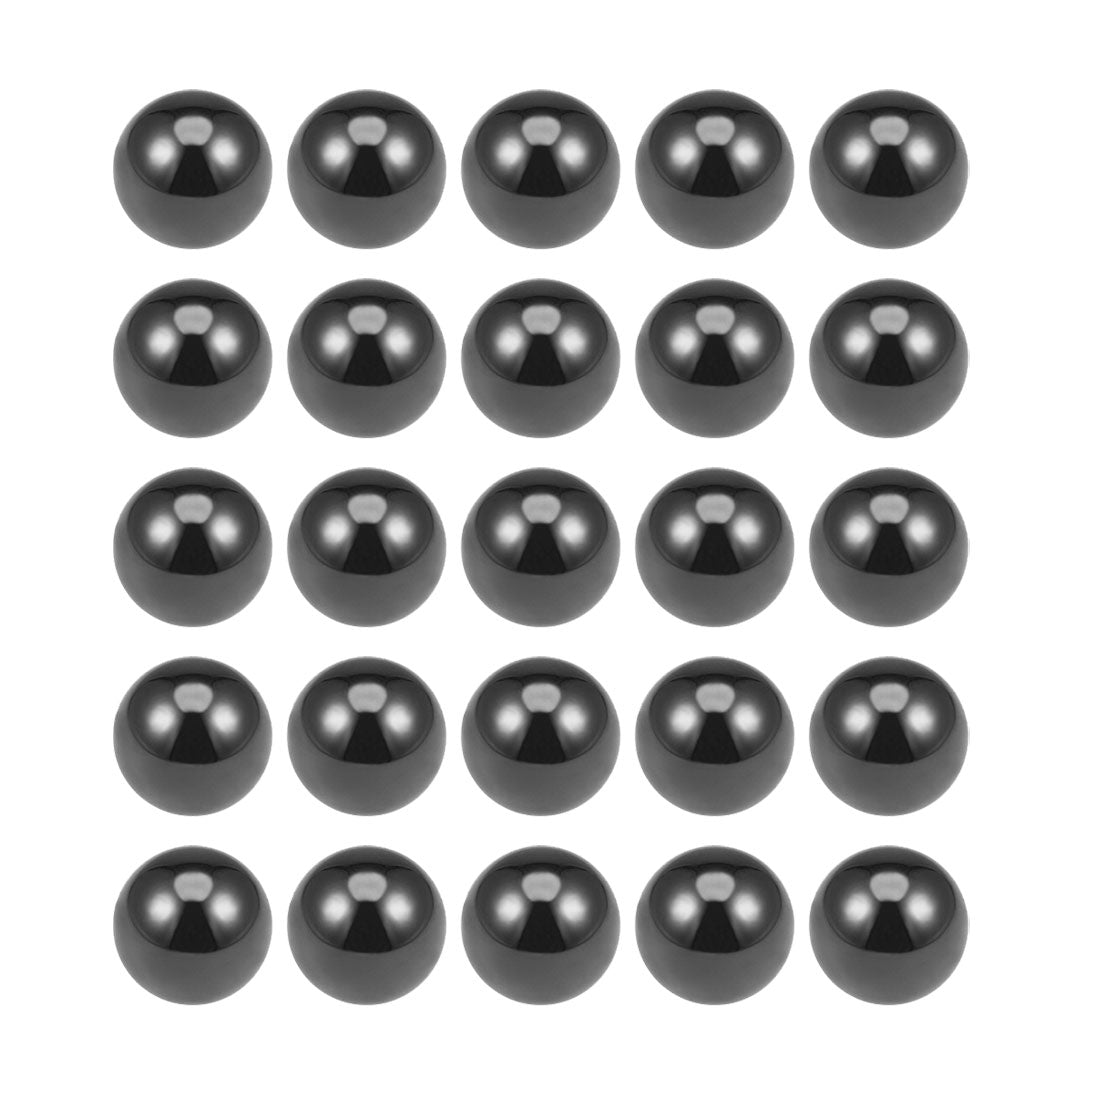 Uxcell Uxcell 5mm Ceramic Bearing Balls, Si3N4 Silicon Nitride Ball G5 Precision 12pcs